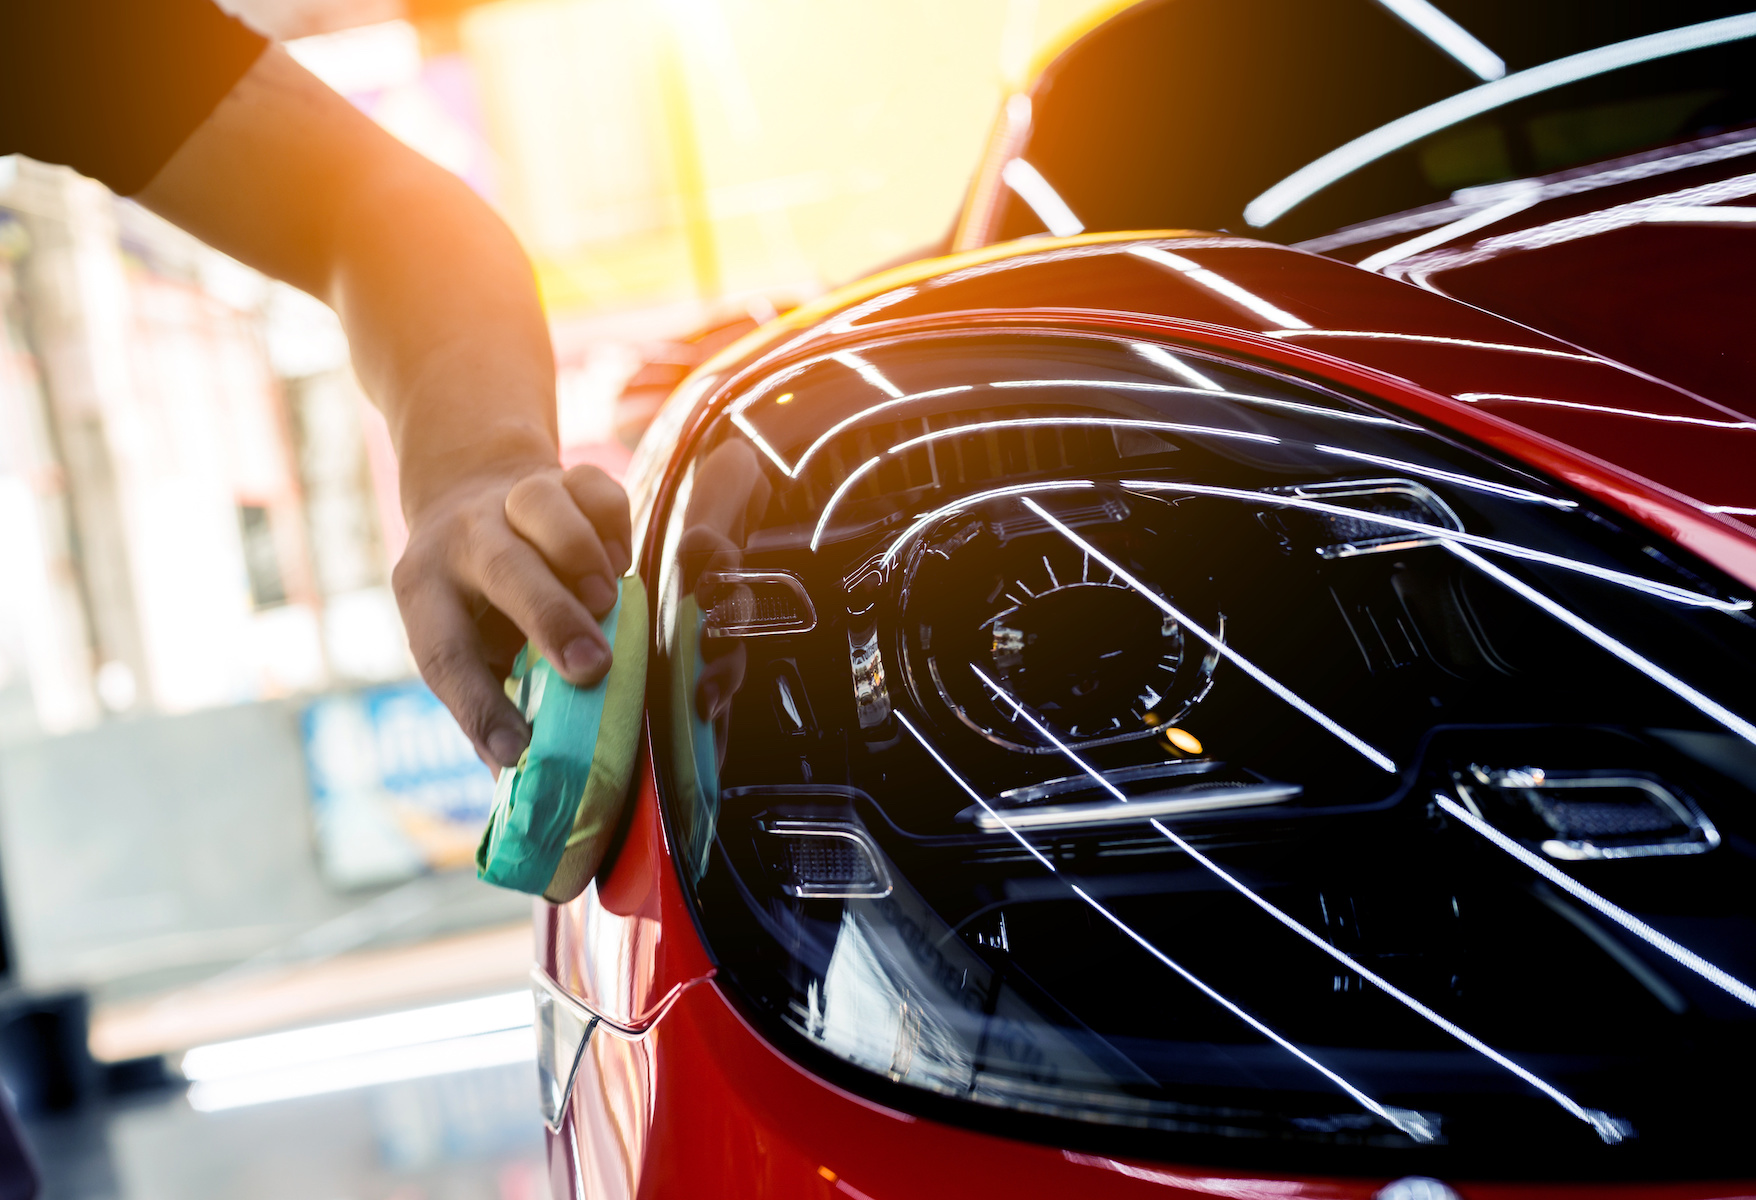 How To Choose The Right Ceramic Coating For Your Vehicle